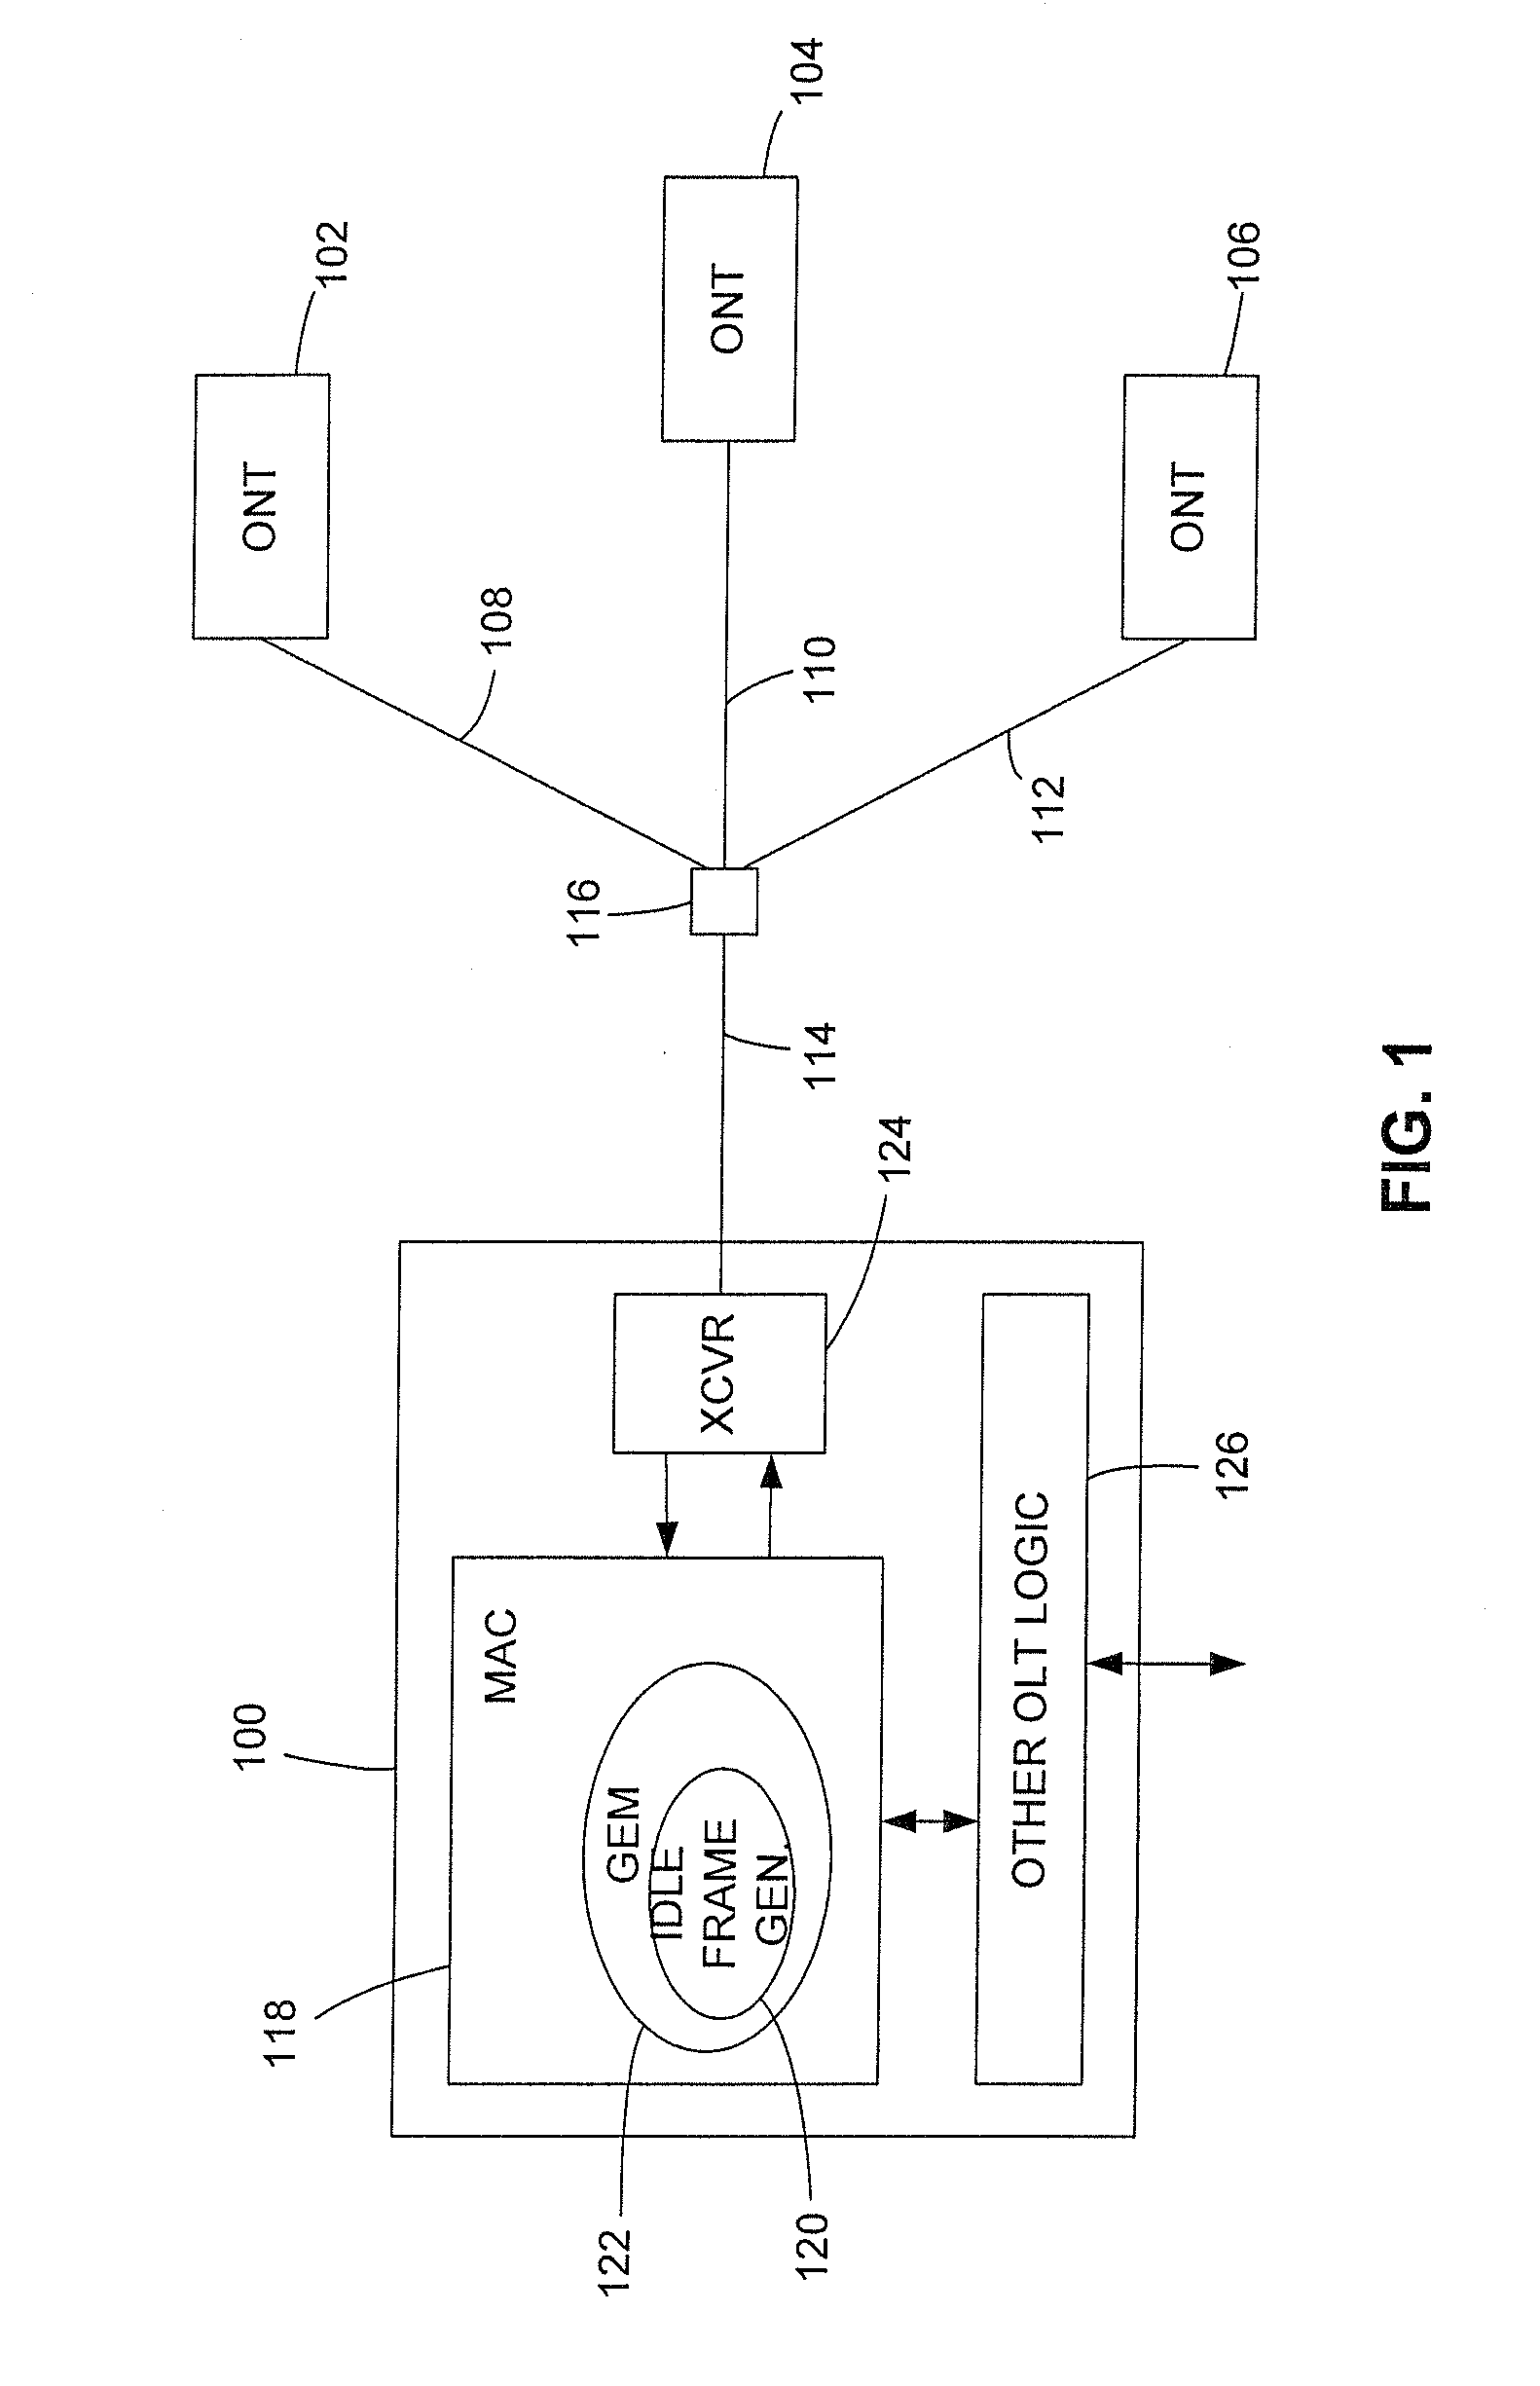 Method and apparatus to reduce the impact of raman interference in passive optical networks with RF video overlay